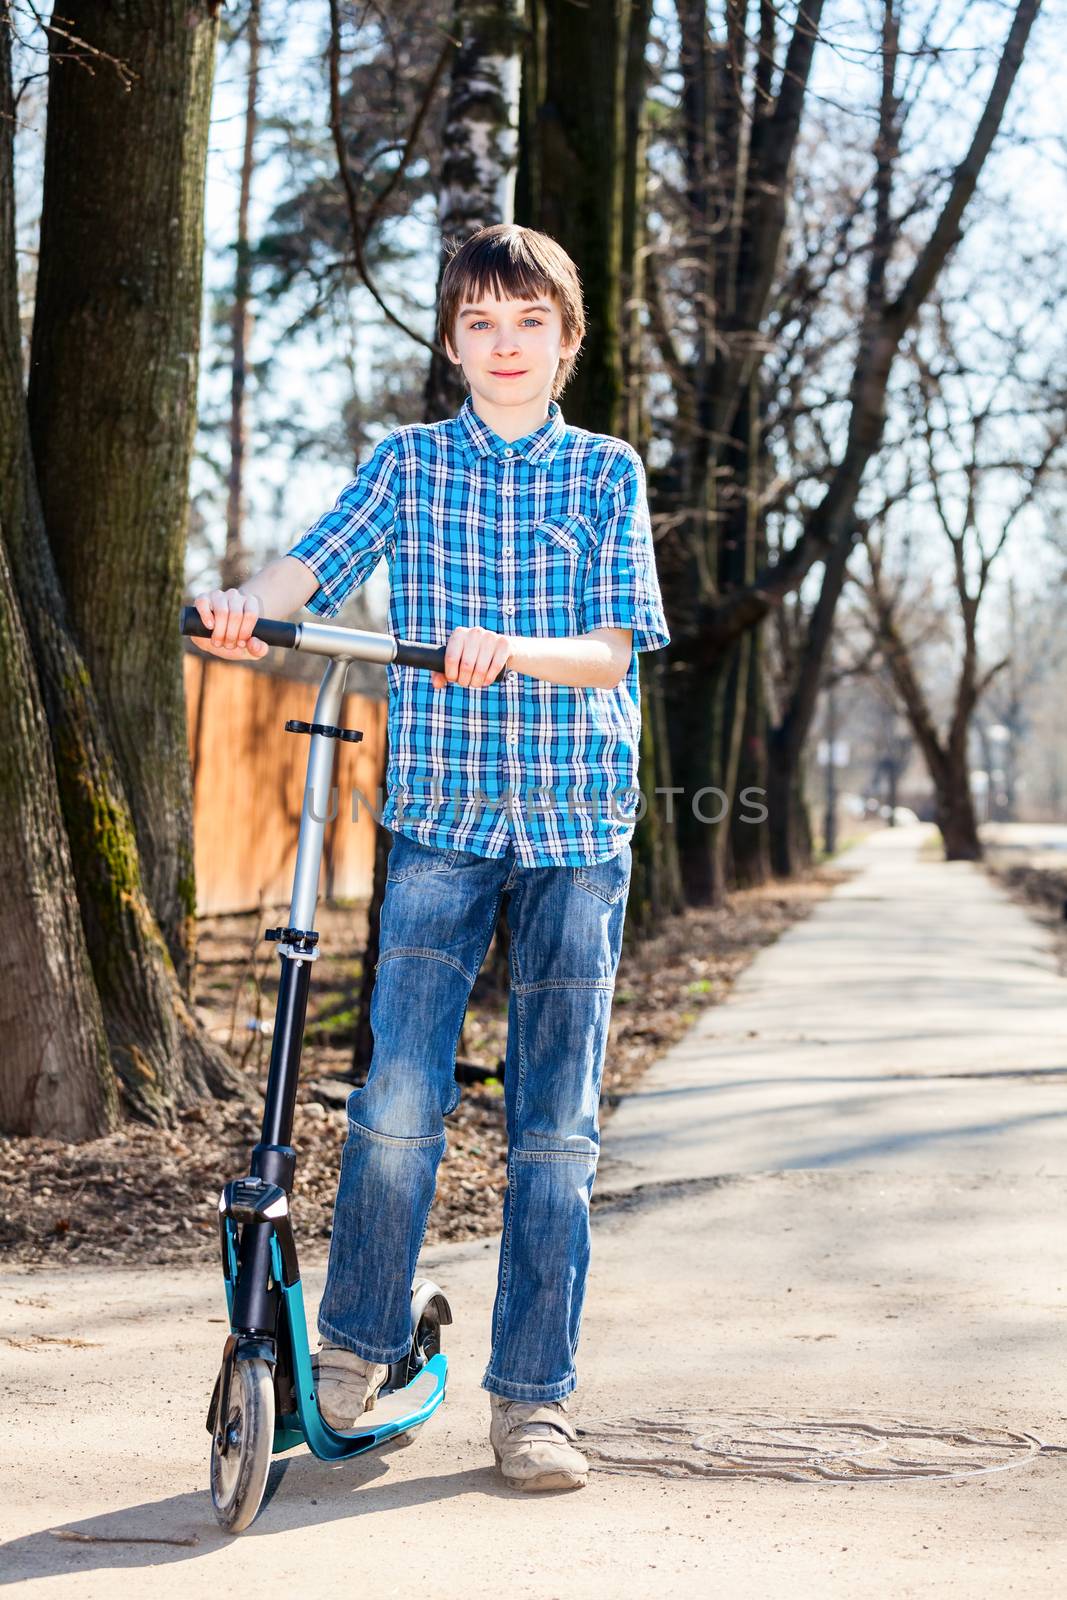 Boy with kick scooter by naumoid